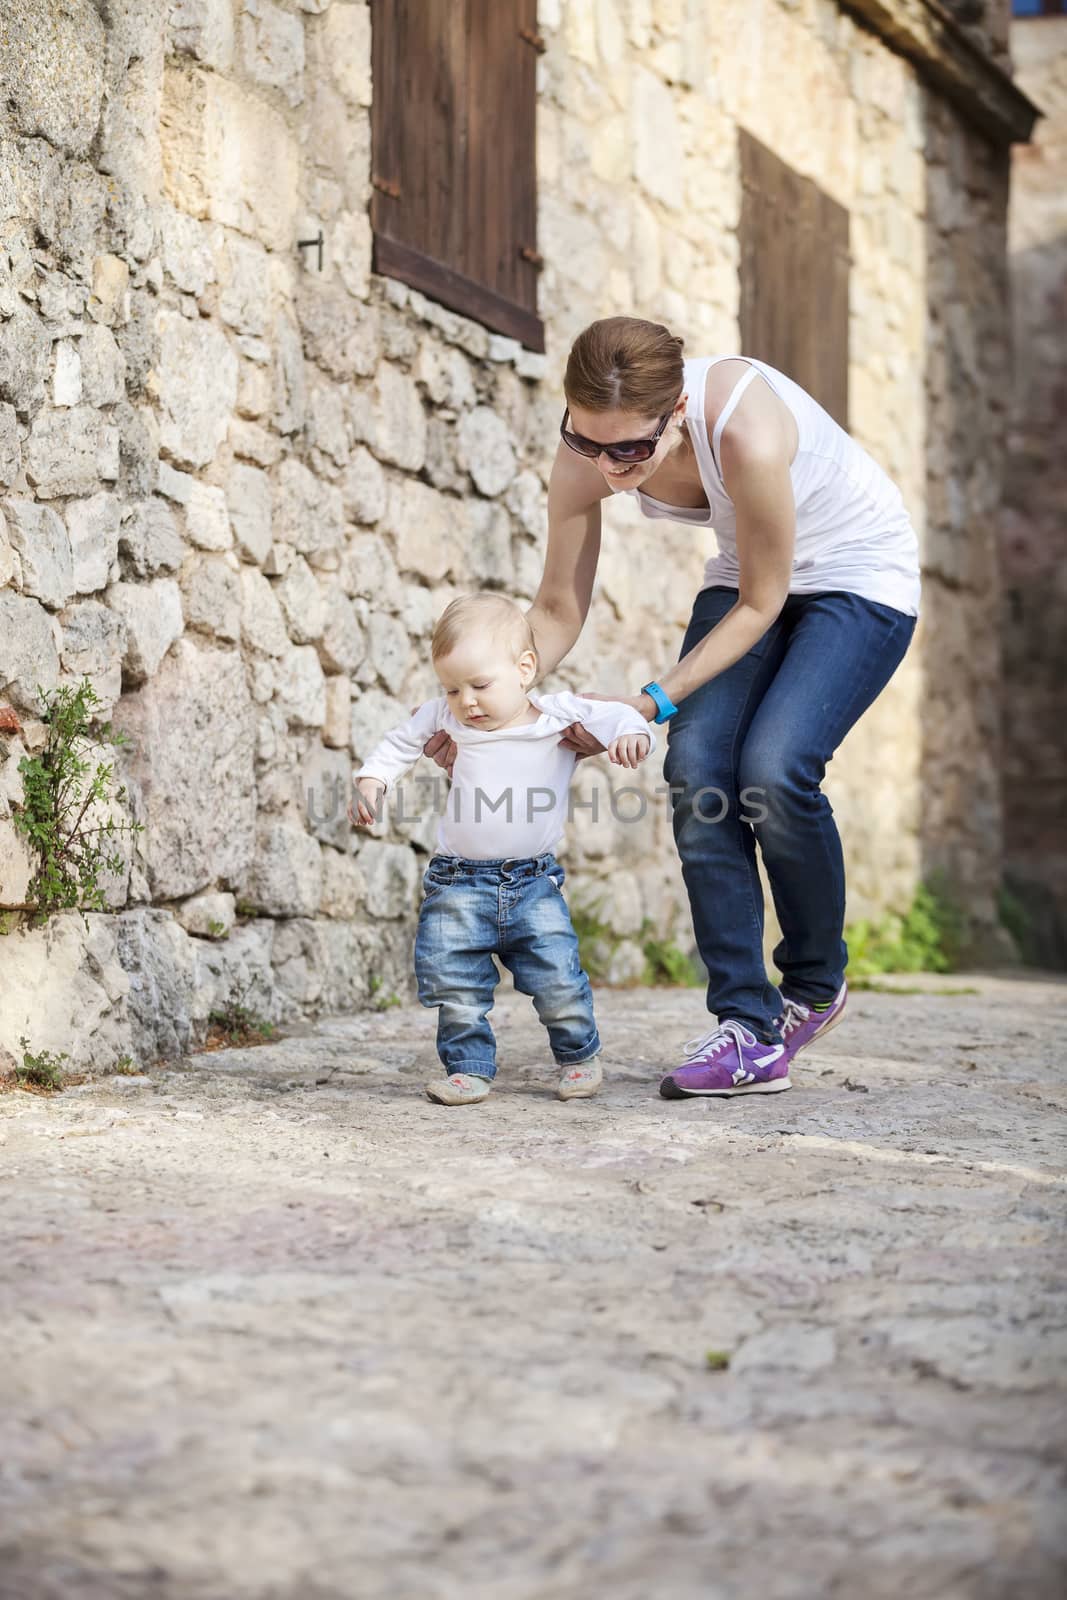 Baby makes his first steps with help of his mother by photobac